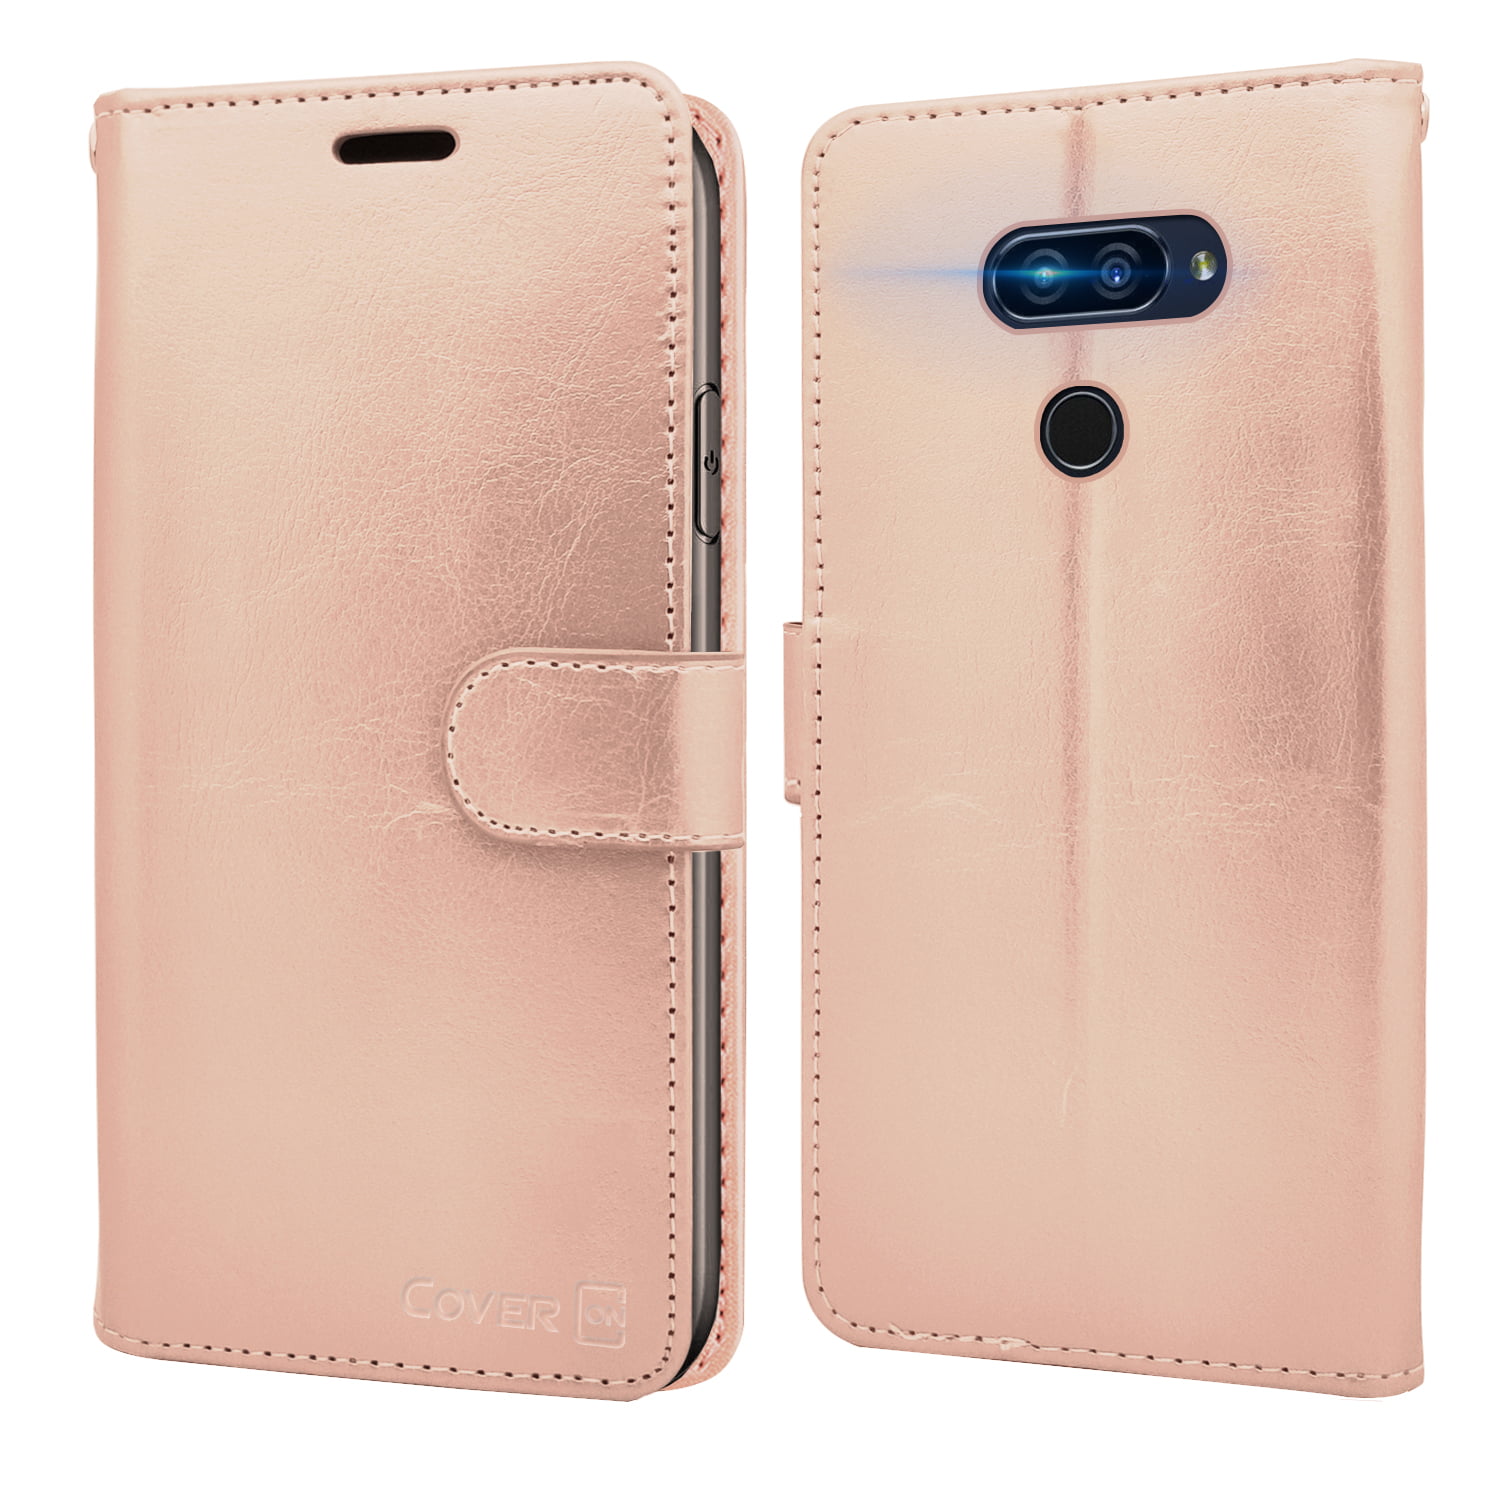 For For Ulefone Note 7P Phone Case Card Slots Pink 6.1 Magnetic Closure Full Protection Book Design Wallet Cover with Kickstand and Leather Case For Ulefone Note 7P 2019